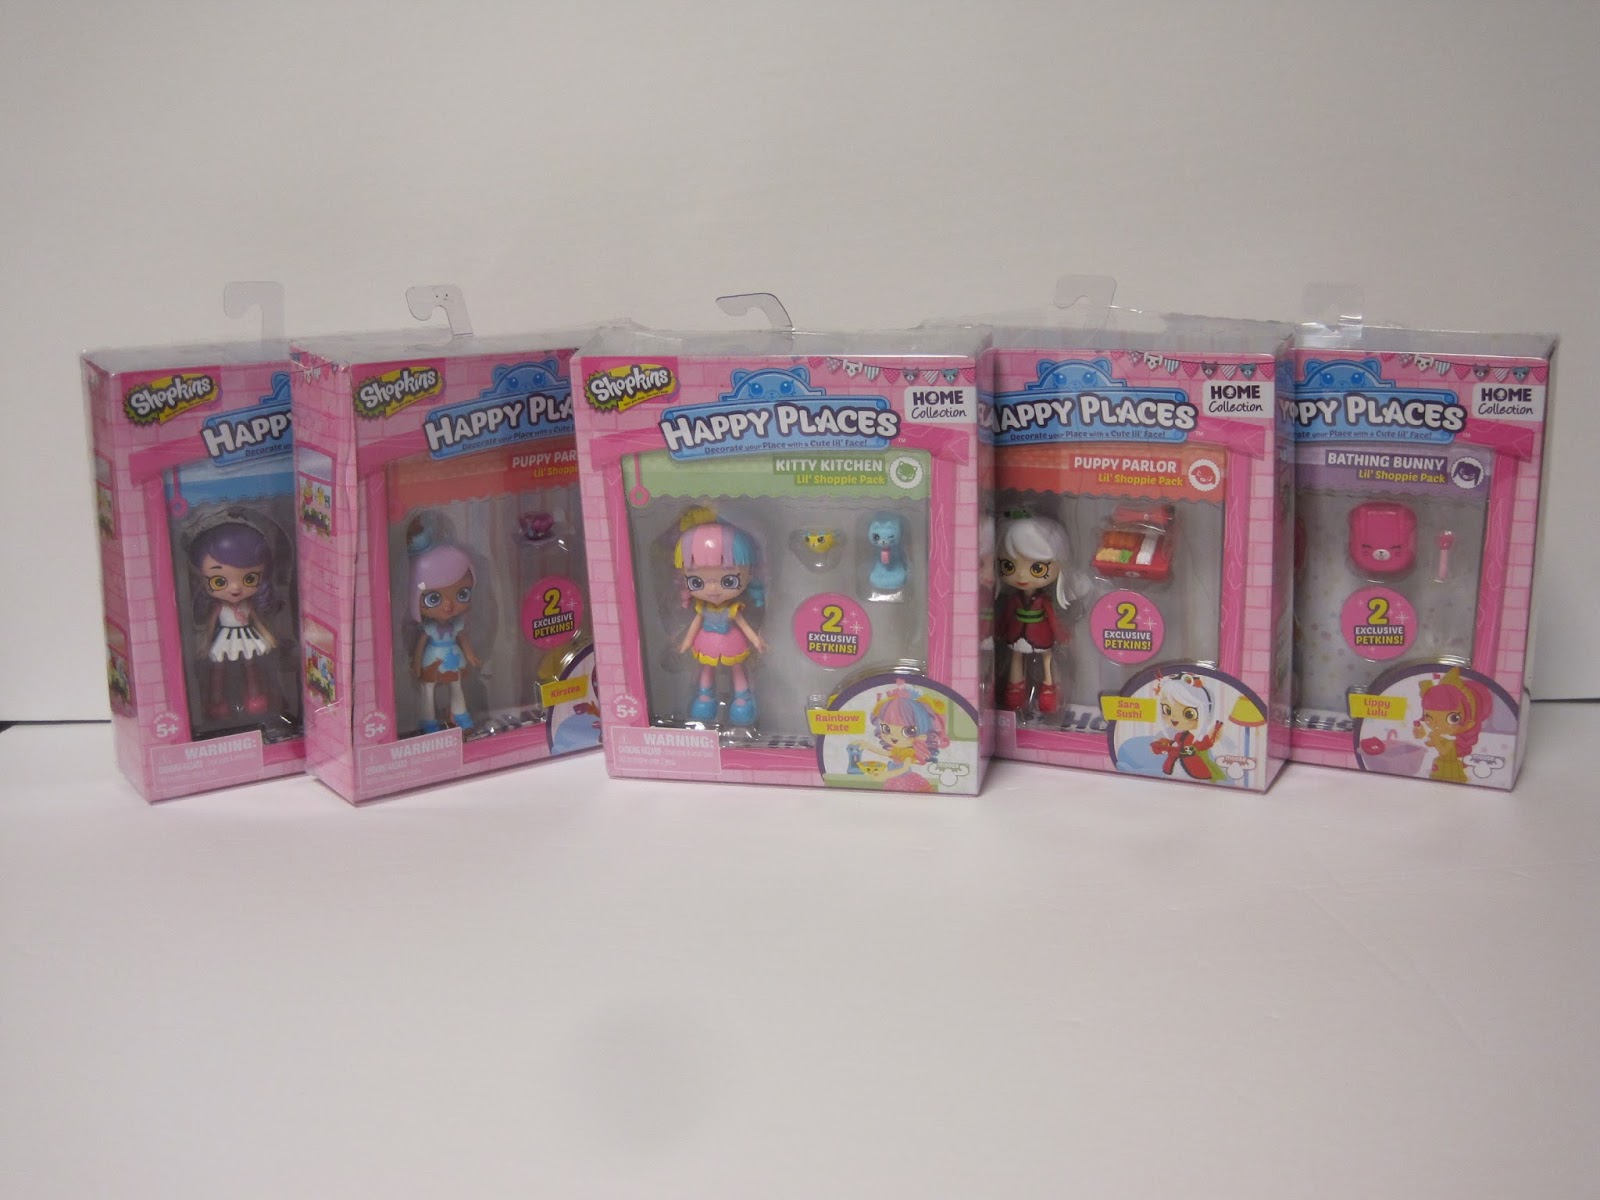 Spaghetti Sue Shopkins Happy Places Lil' Shoppie Doll Pack Decorate Your Place 